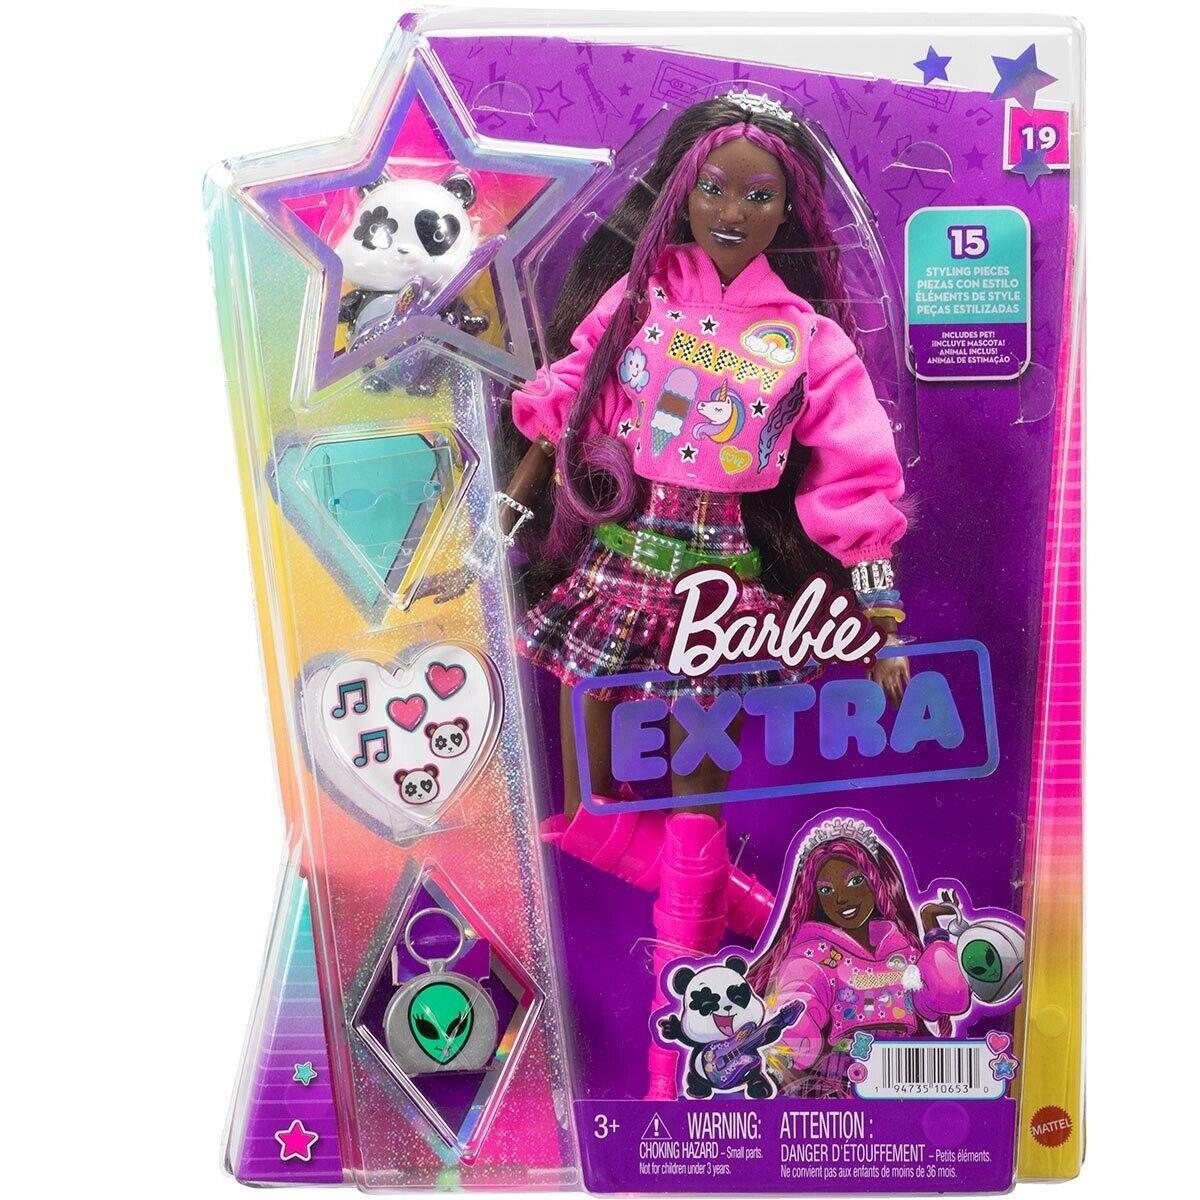 Mattel Barbie Extra Doll 19 with Pet Panda Clothes and Accessories - 2022